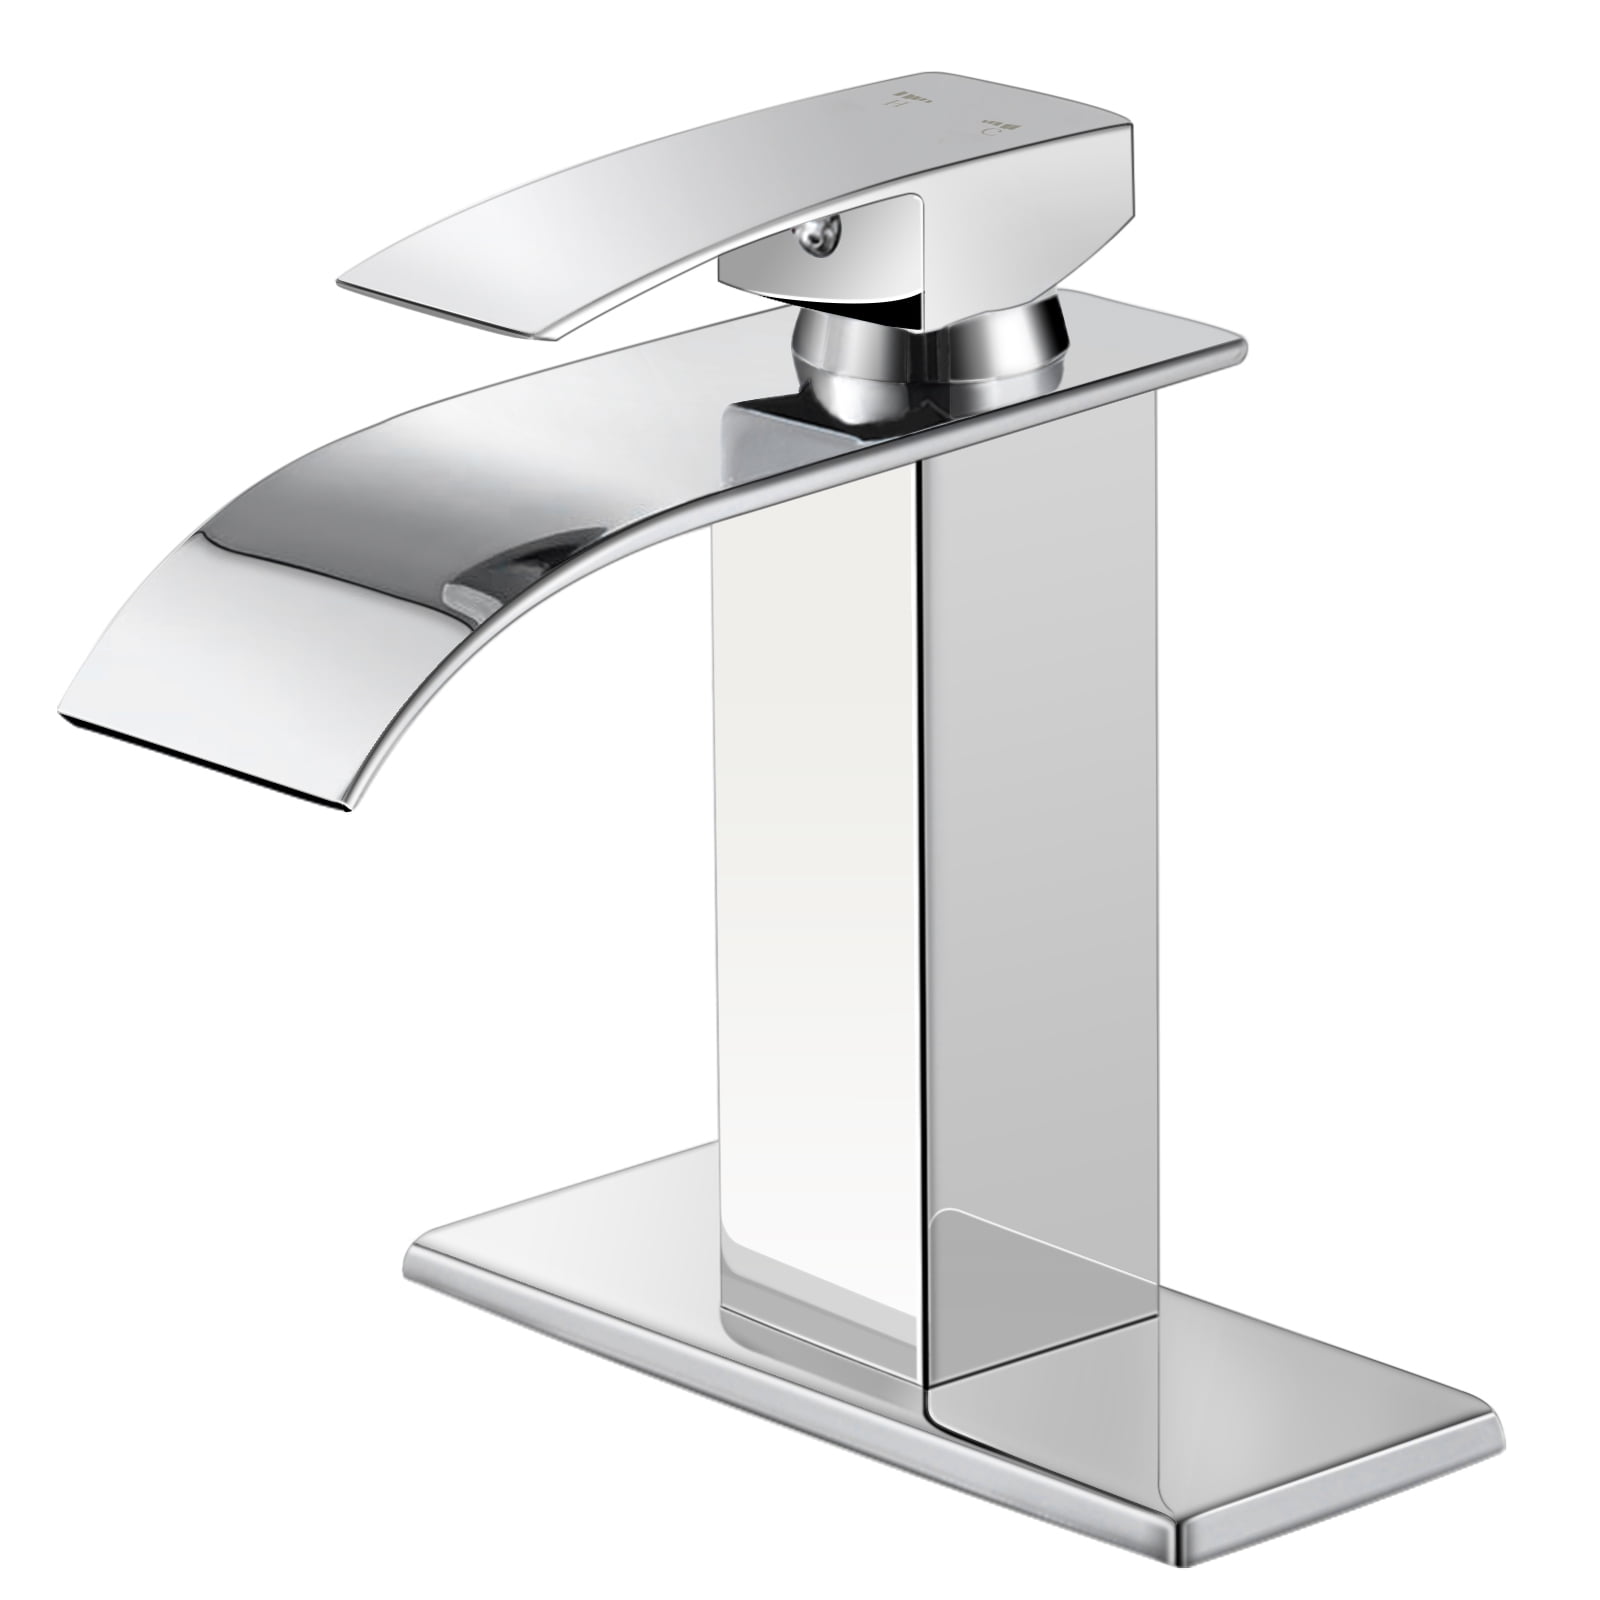 Details about   8 inch 3pcs Bathroom Basin Sink Faucet Widespread Brushed Nickel Mixer Tap 